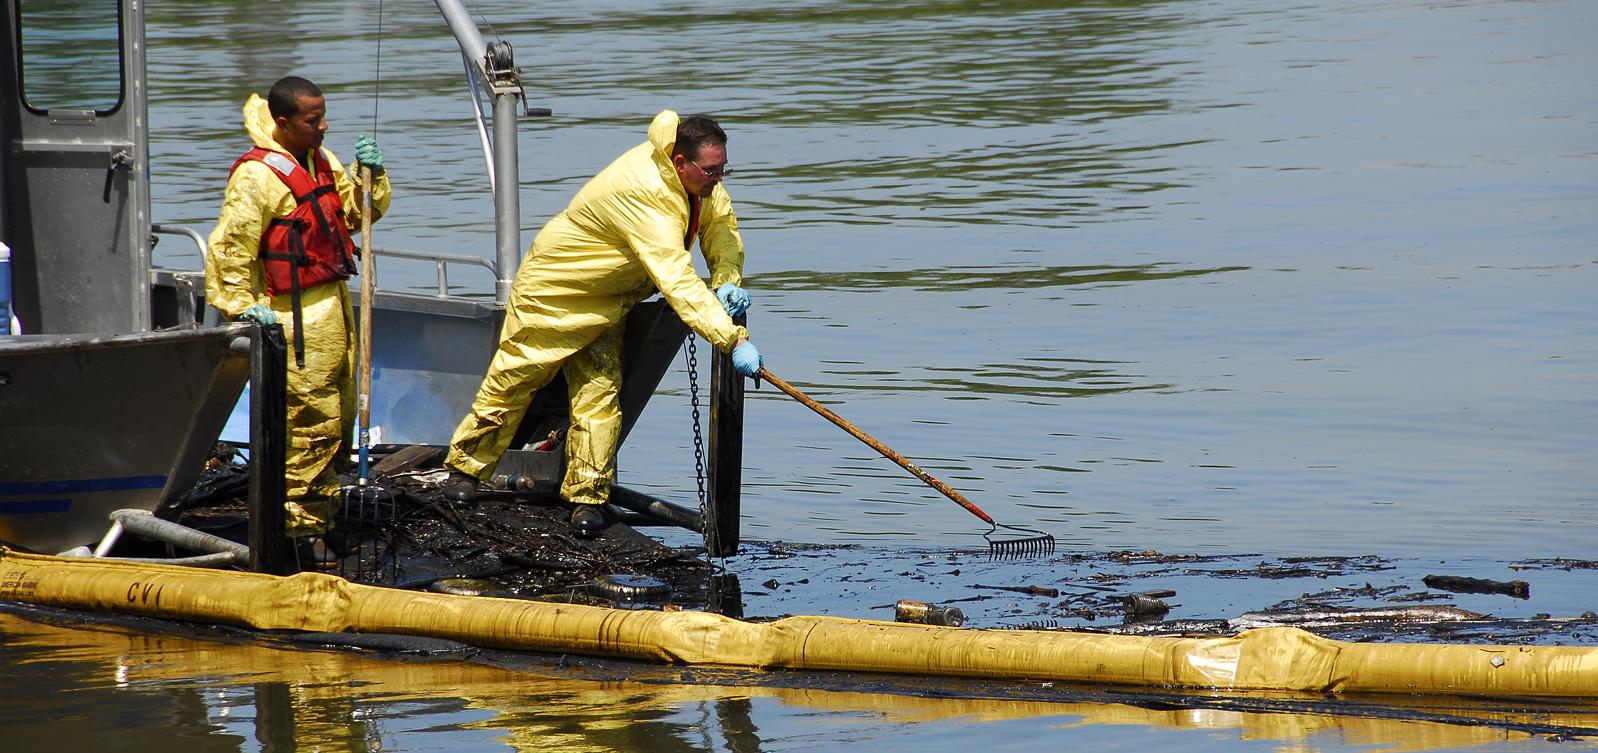 Workers clean up oil spill